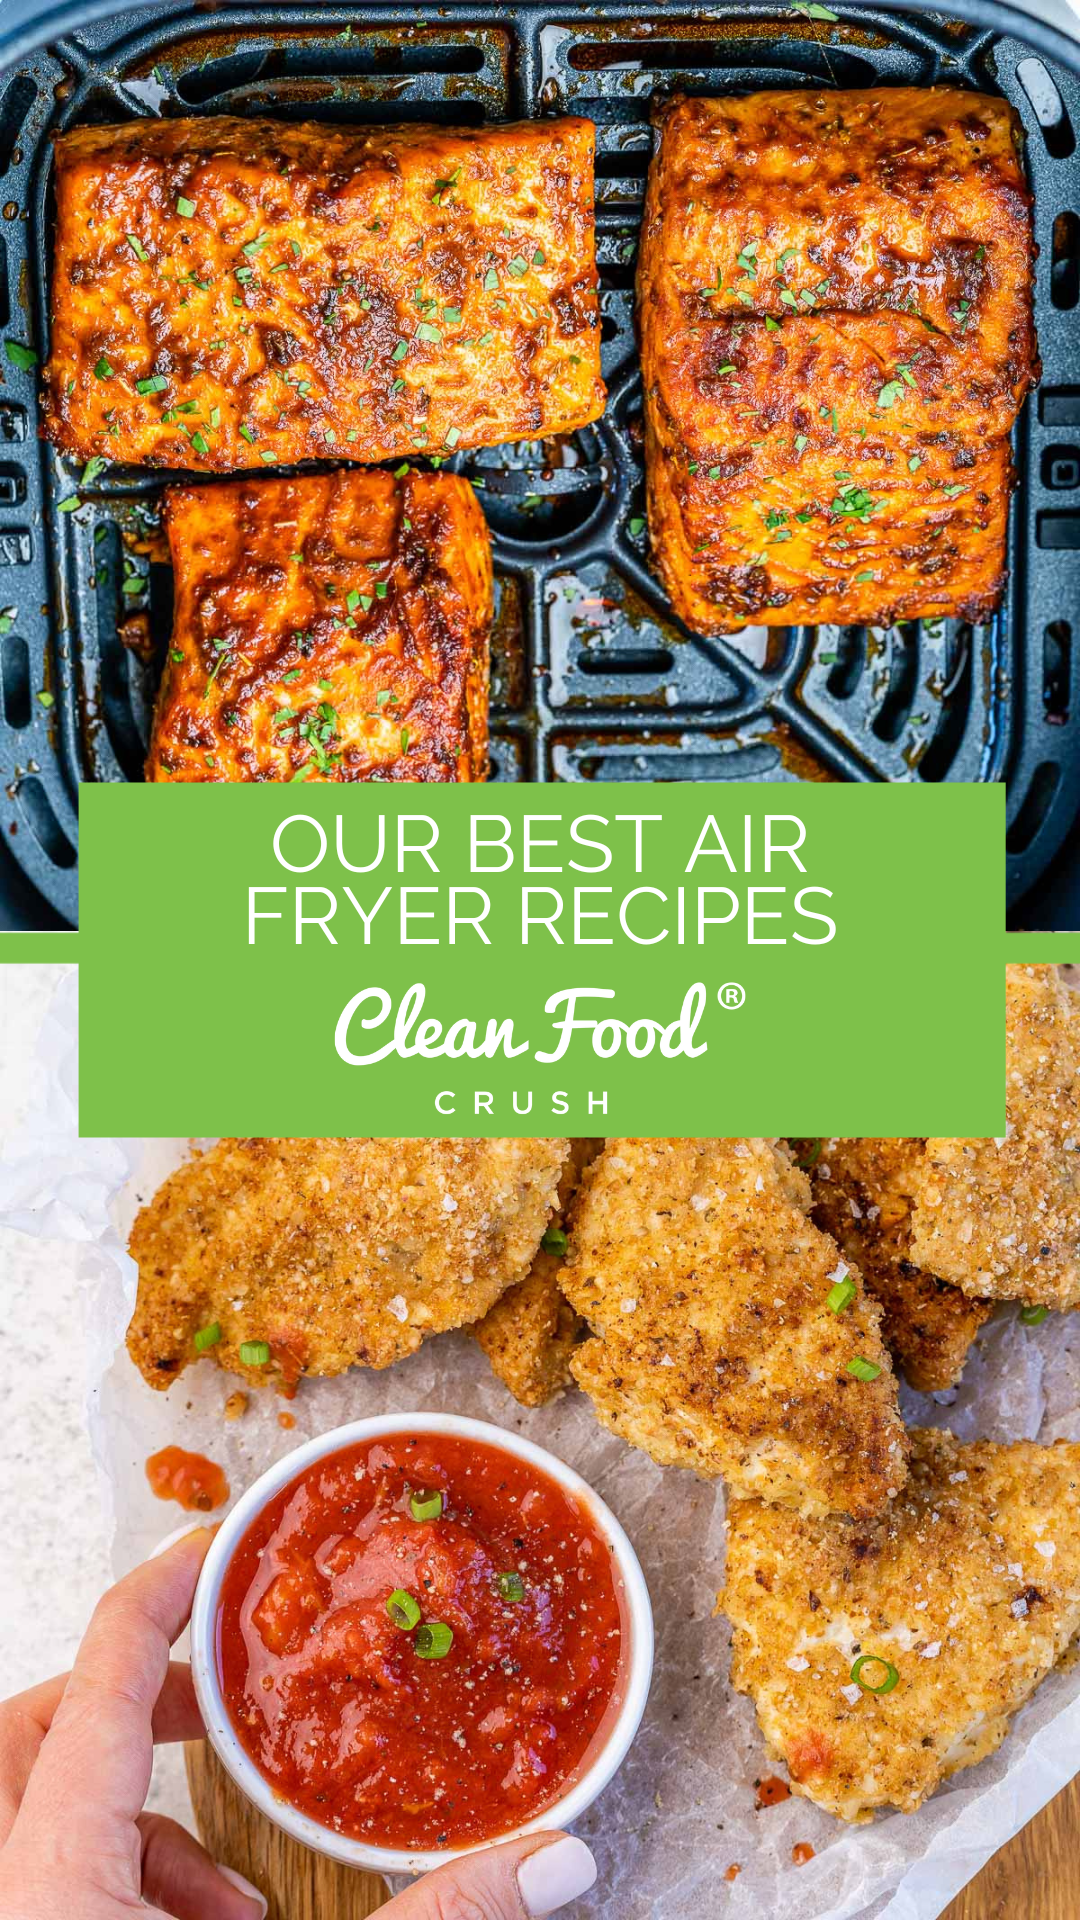 Healthy Air Fryer Recipes Roundup